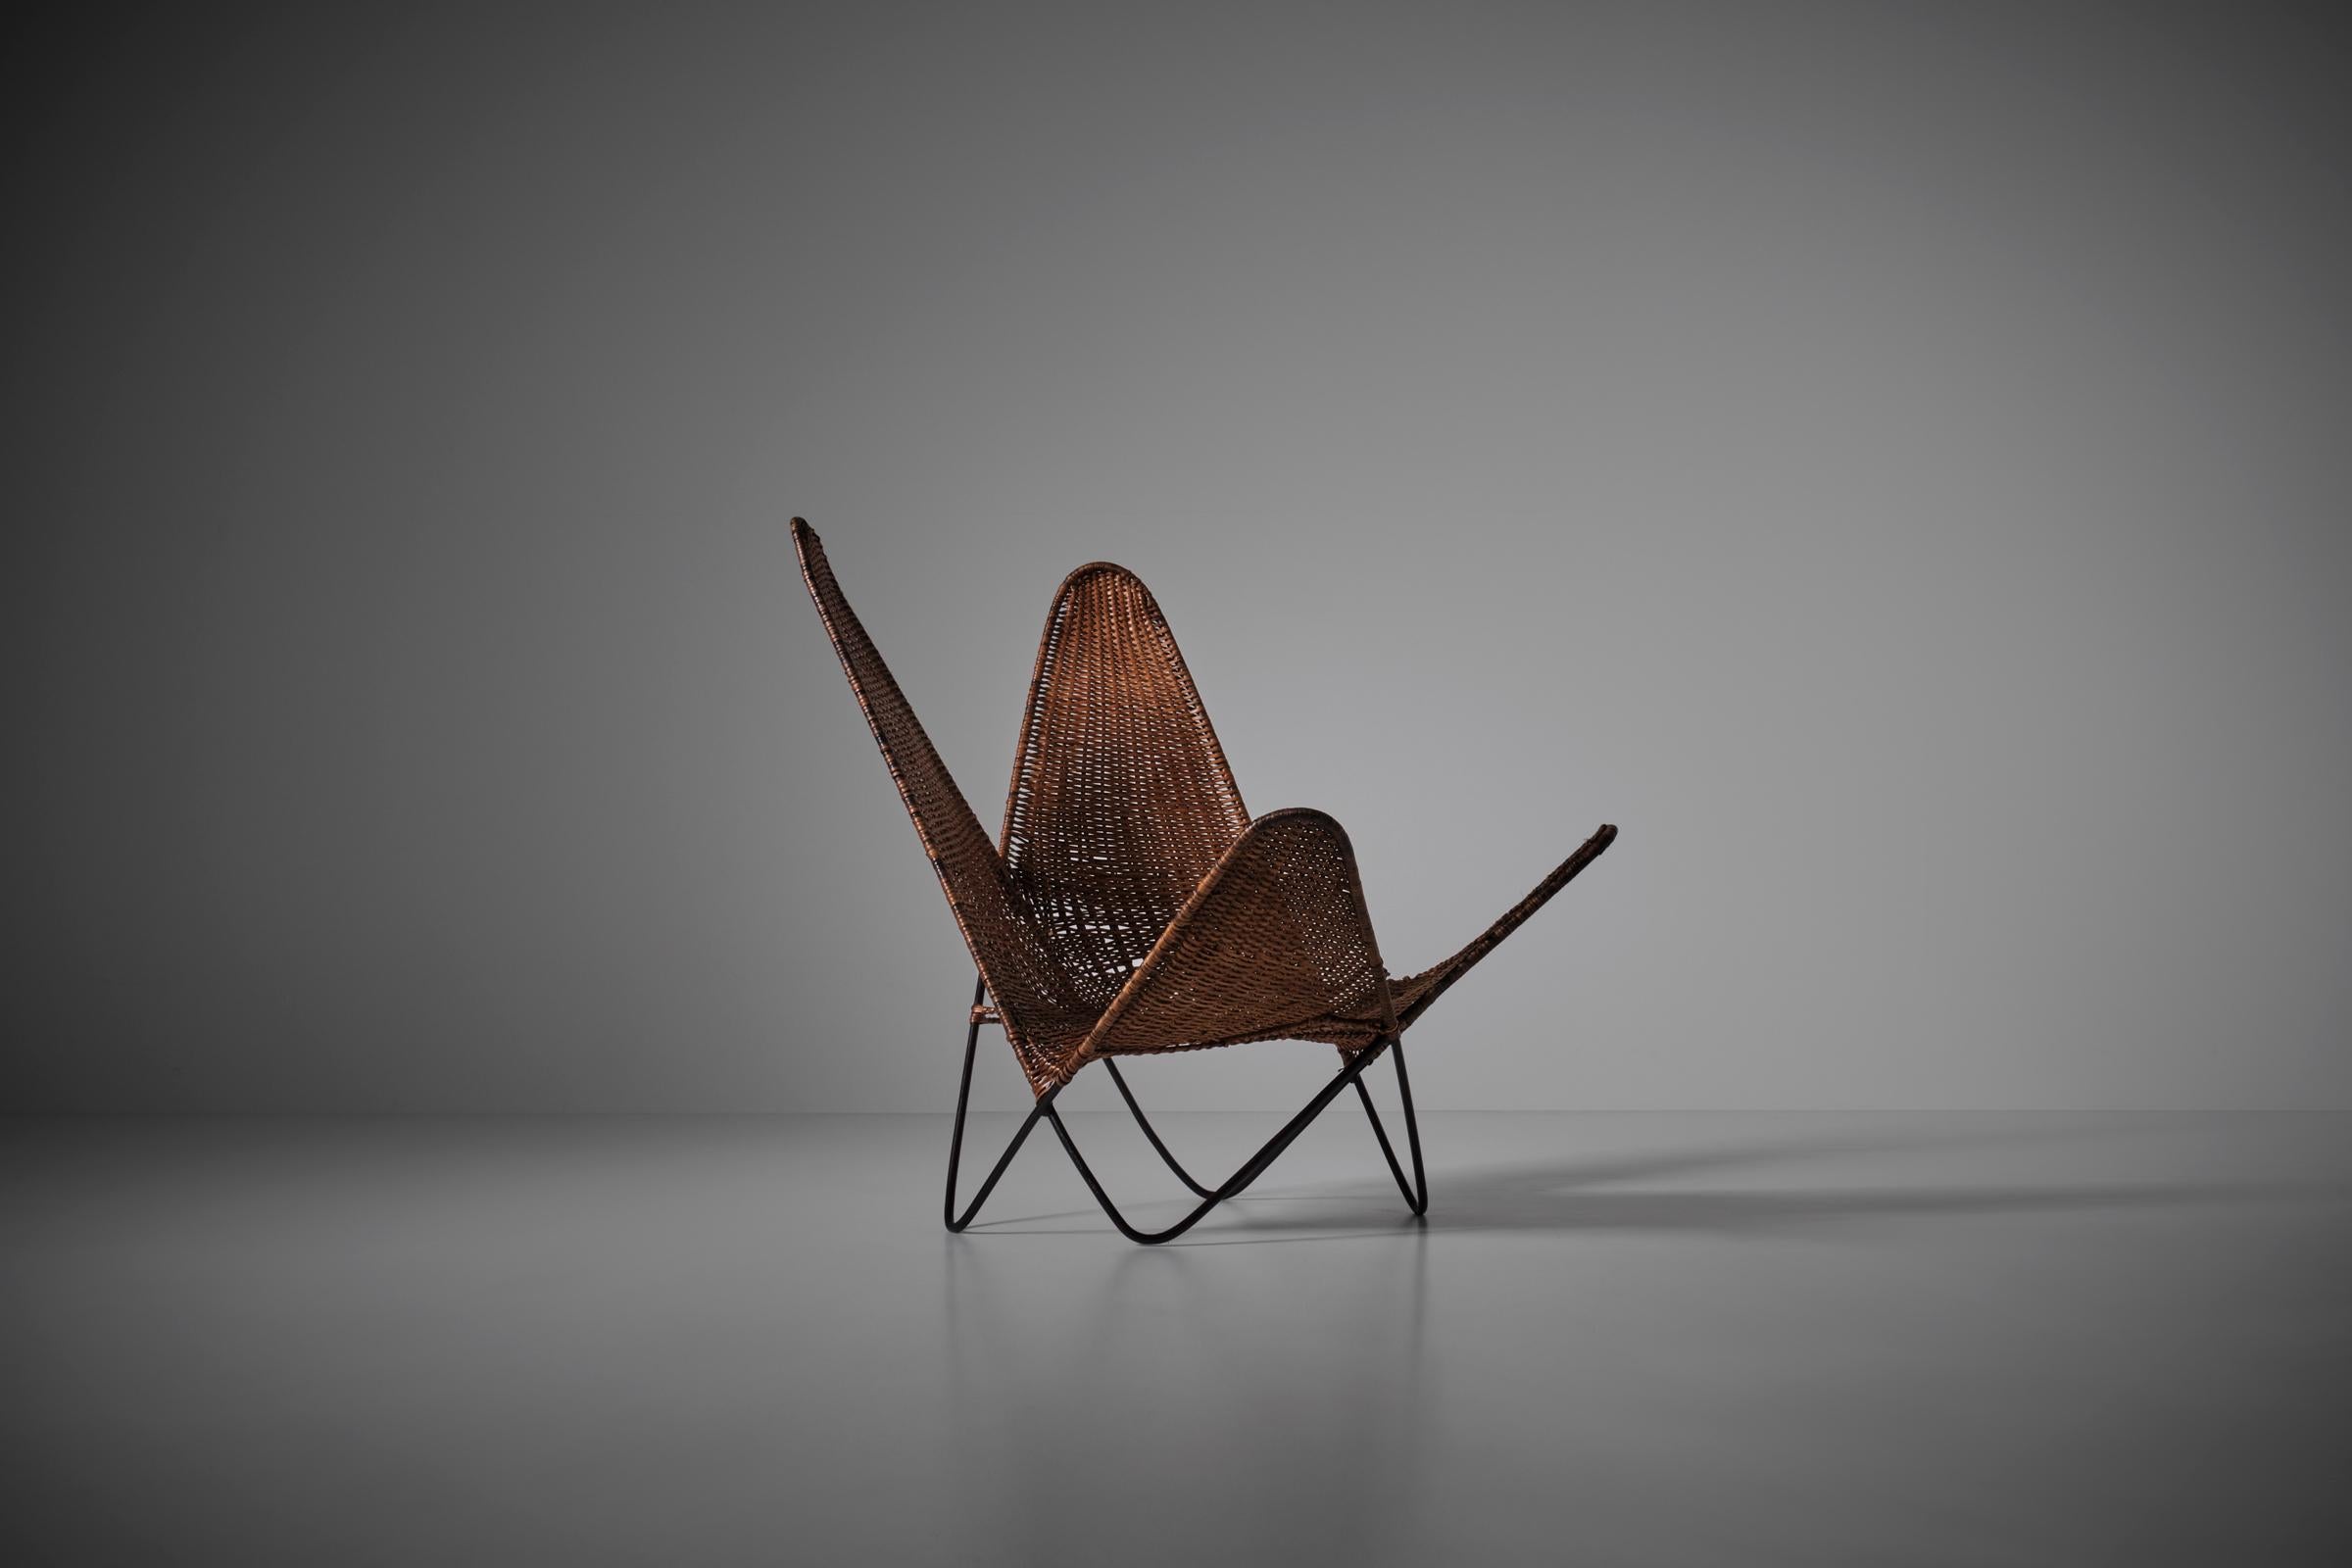 Exceptional rattan butterfly chair, France 1960s. Sculptural lounge chair with an interesting contrast in materials and textures between the thin black metal wire framing and the crafted woven rattan seat. The chair is in a very good and strong